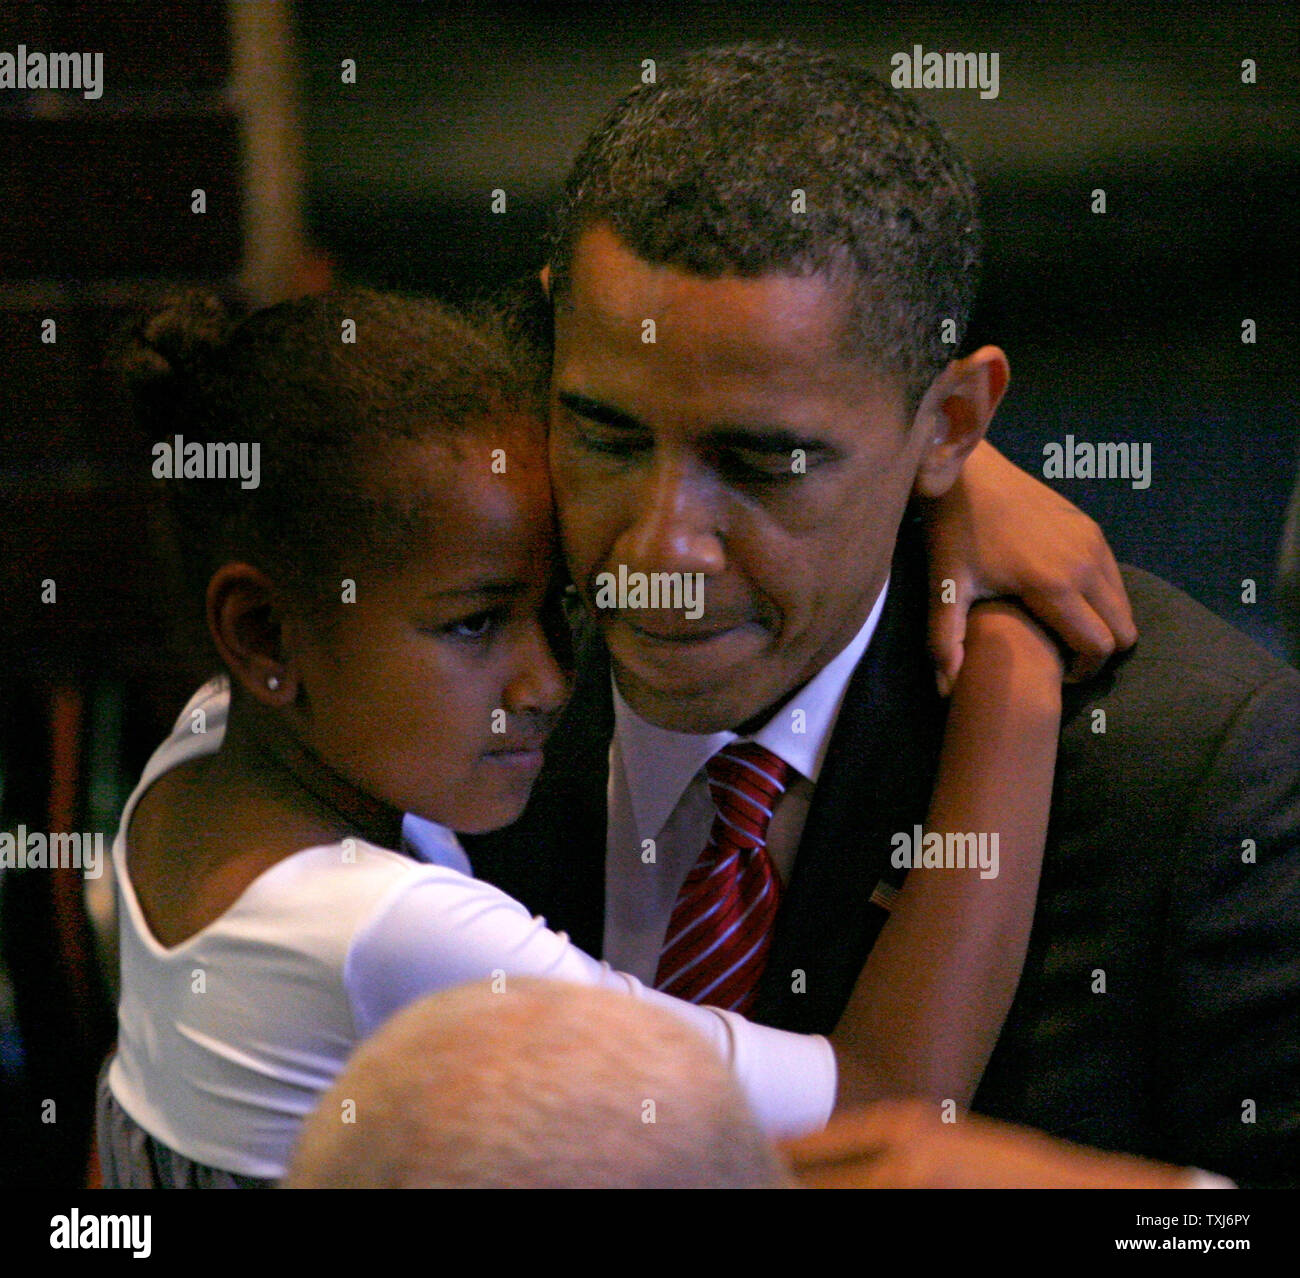 Democratic presidential hopeful Sen. Barack Obama (R) carries out his daughter Sasha, 7, after addressing congregants at the Apostolic Church of God in Chicago on June 15, 2008. Obama discussed the importance of fatherhood in his address to the church. (UPI Photo/Brian Kersey) Stock Photo